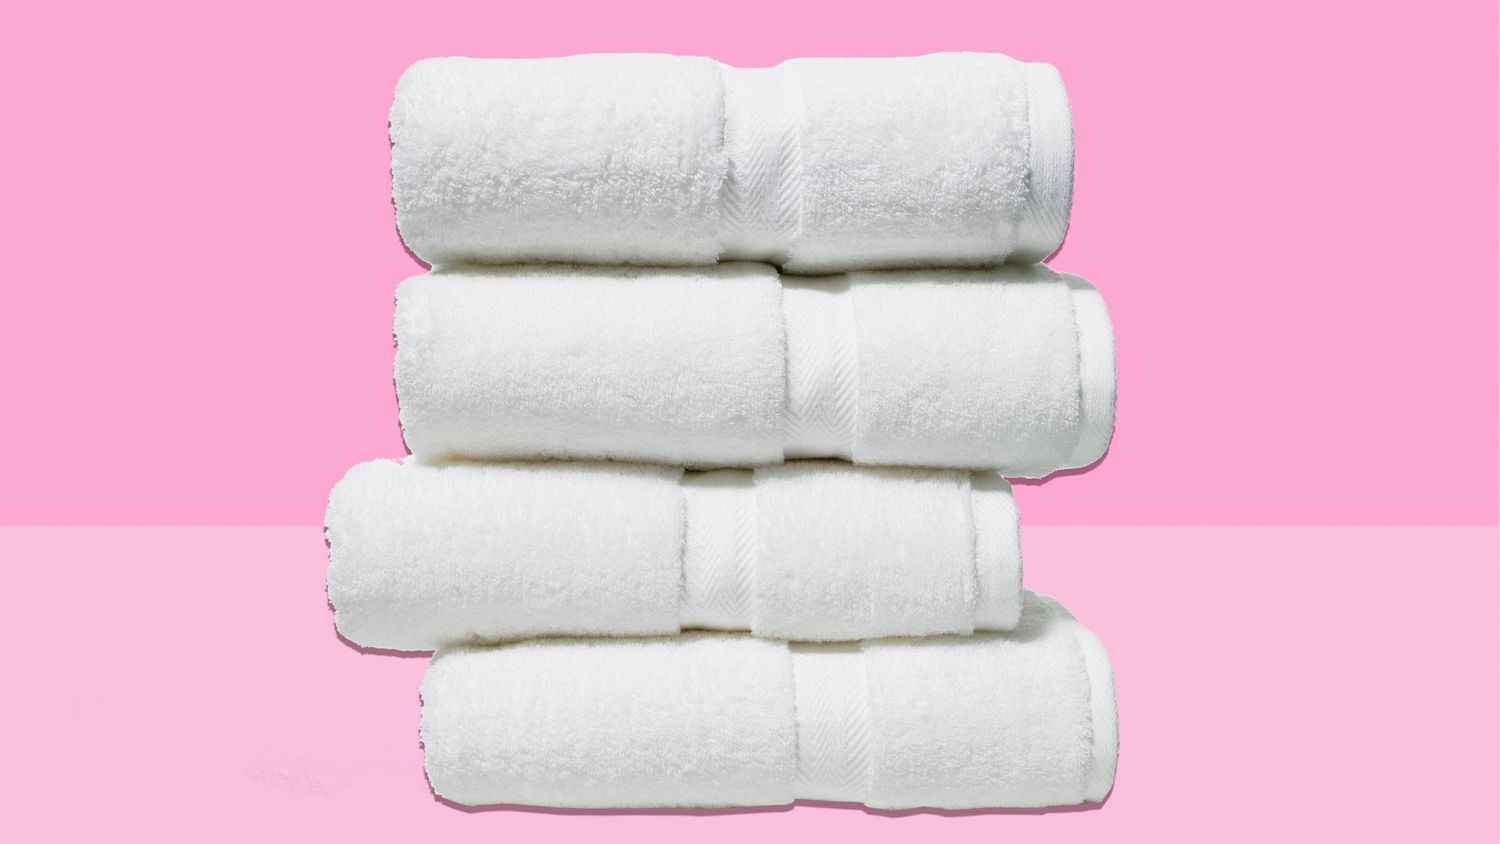 stack of fresh white towels: organizing your home like a hotel